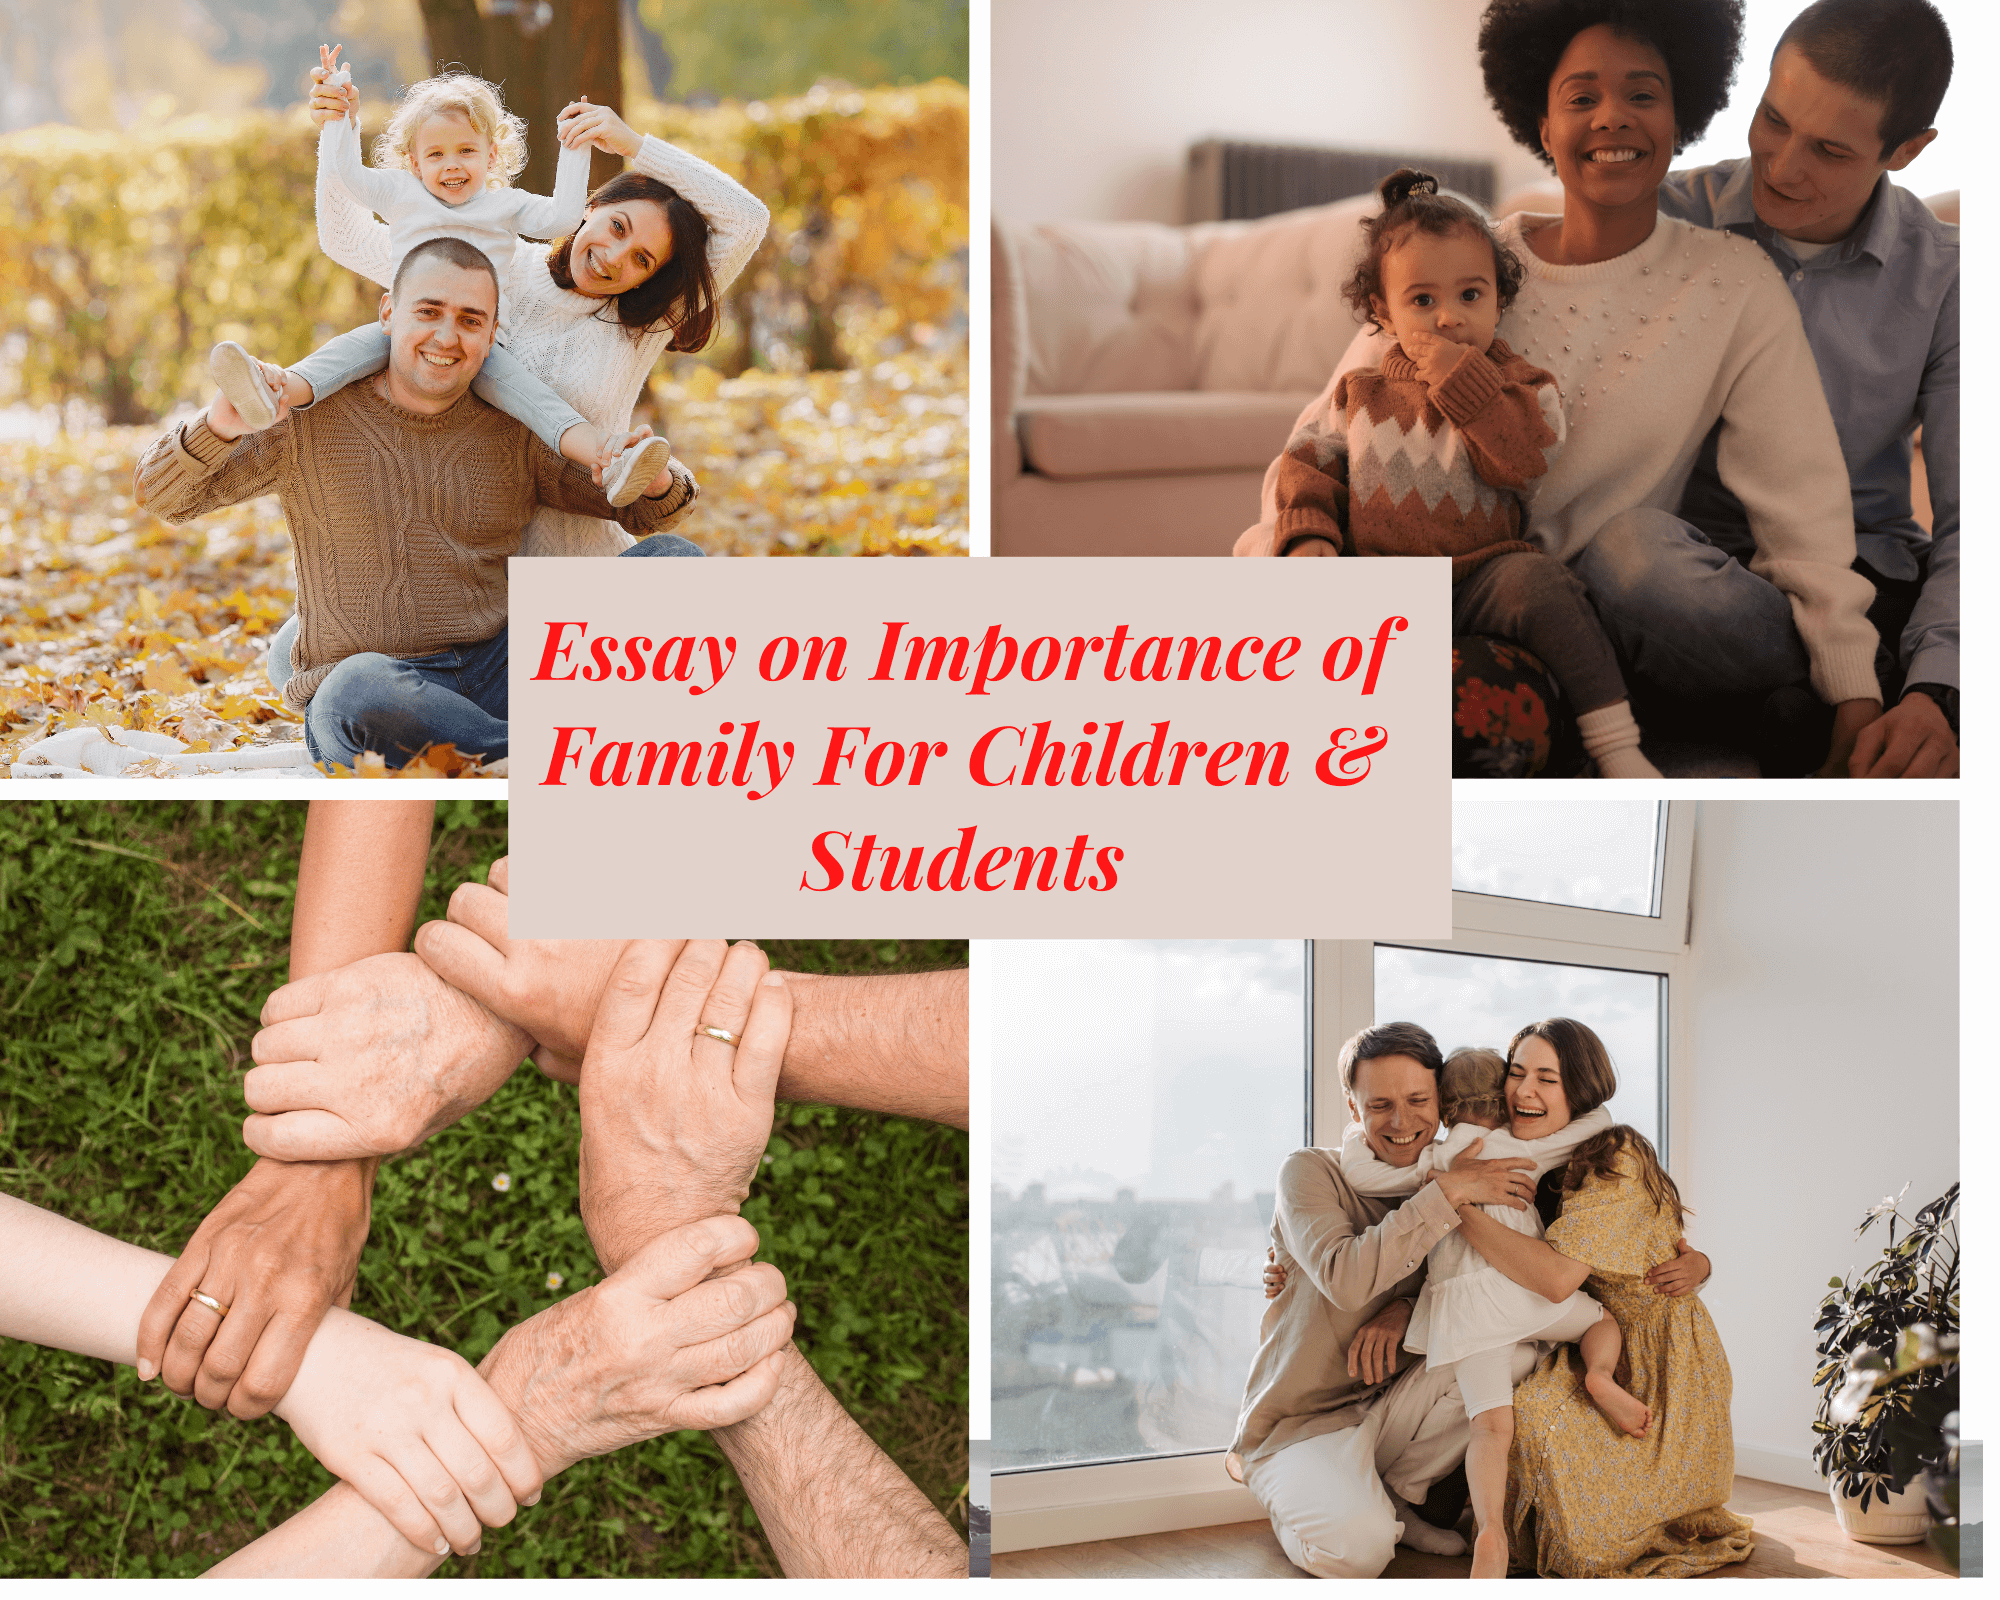 Essay on importance of family for children and students